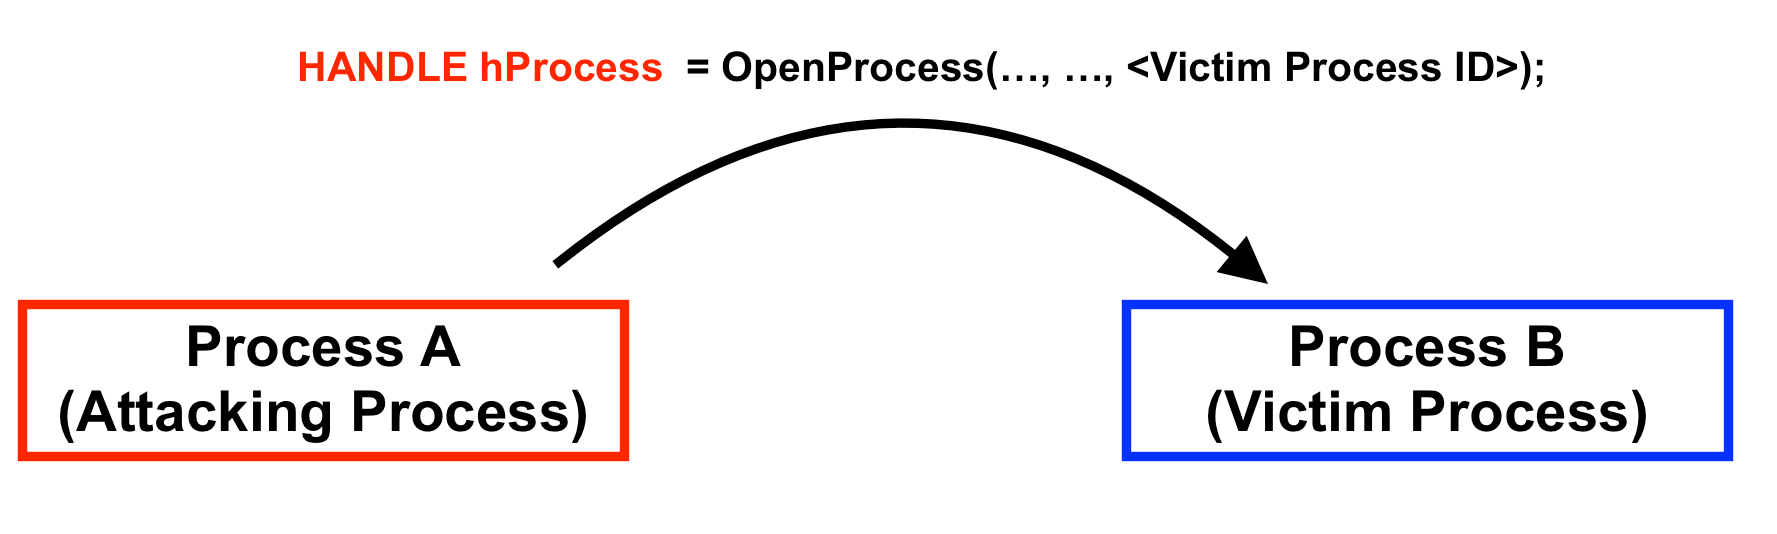 Attacking Process Receiving a Handle to Remote Process